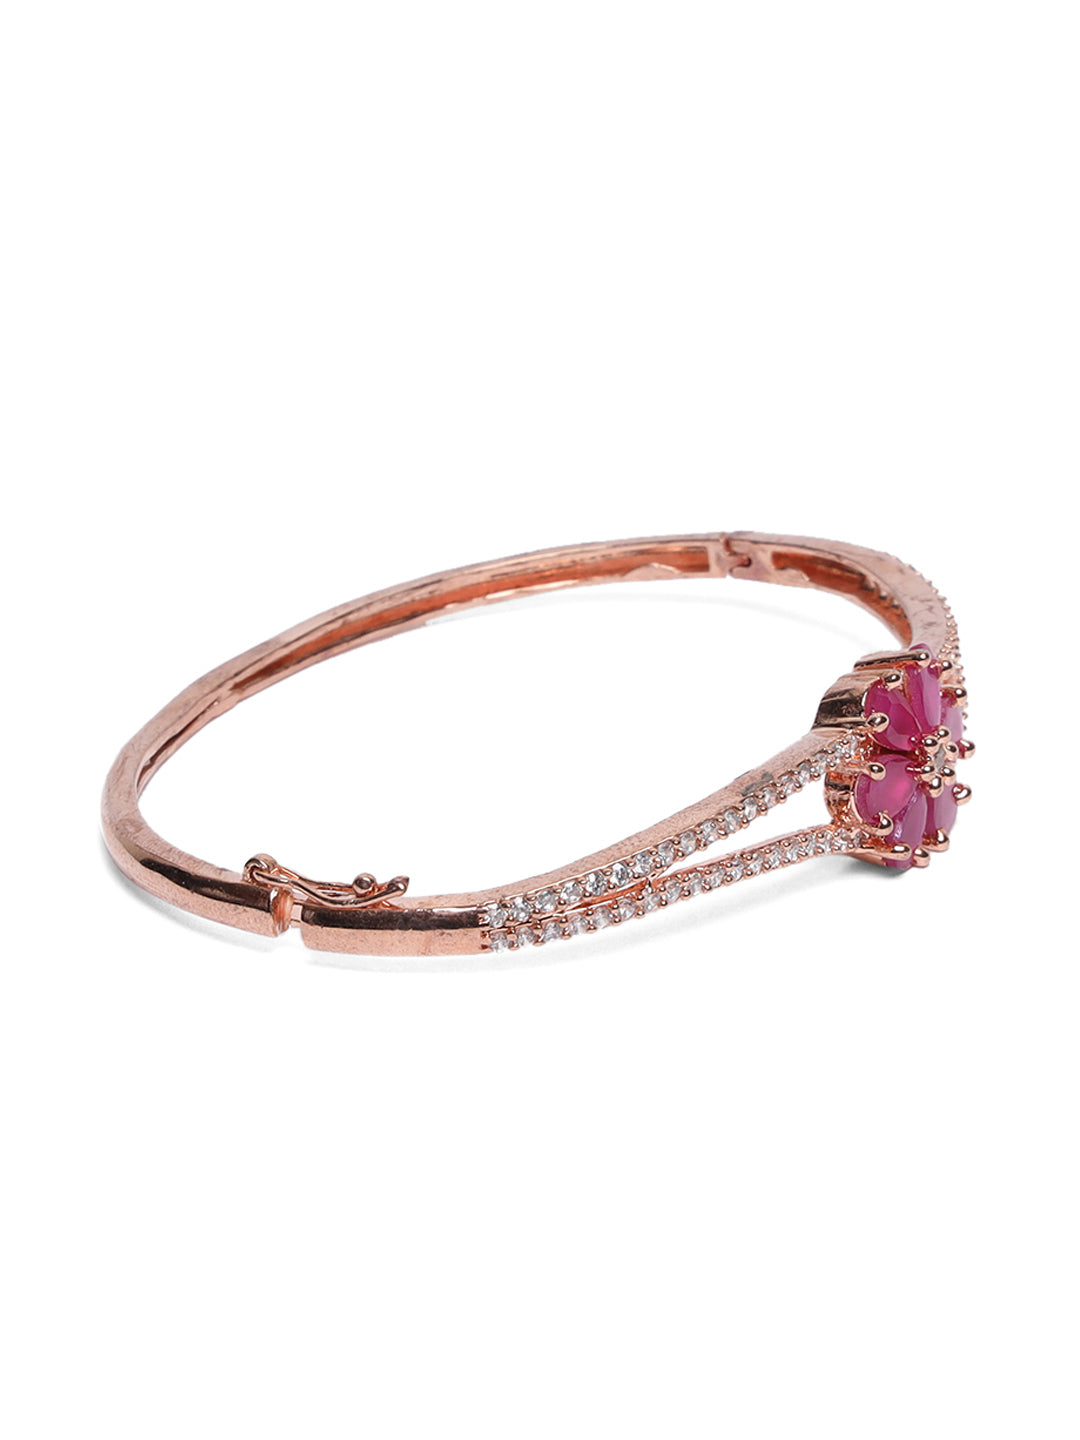 Rose Gold-Plated American Diamond and Ruby Studded Floral Patterned Bracelet - Jazzandsizzle